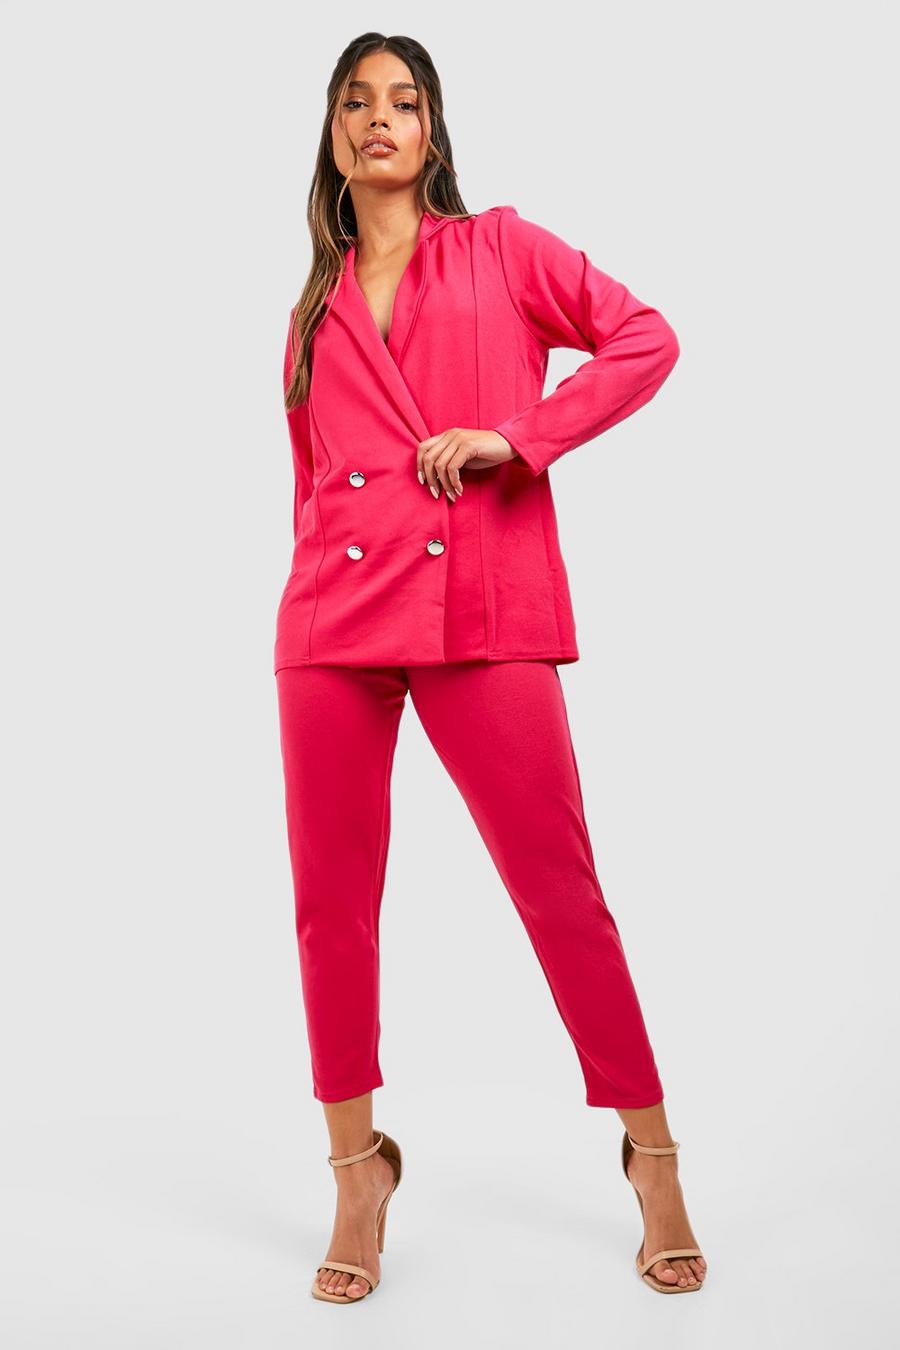 Hot pink rose Double Breasted Blazer And Trouser Suit Set